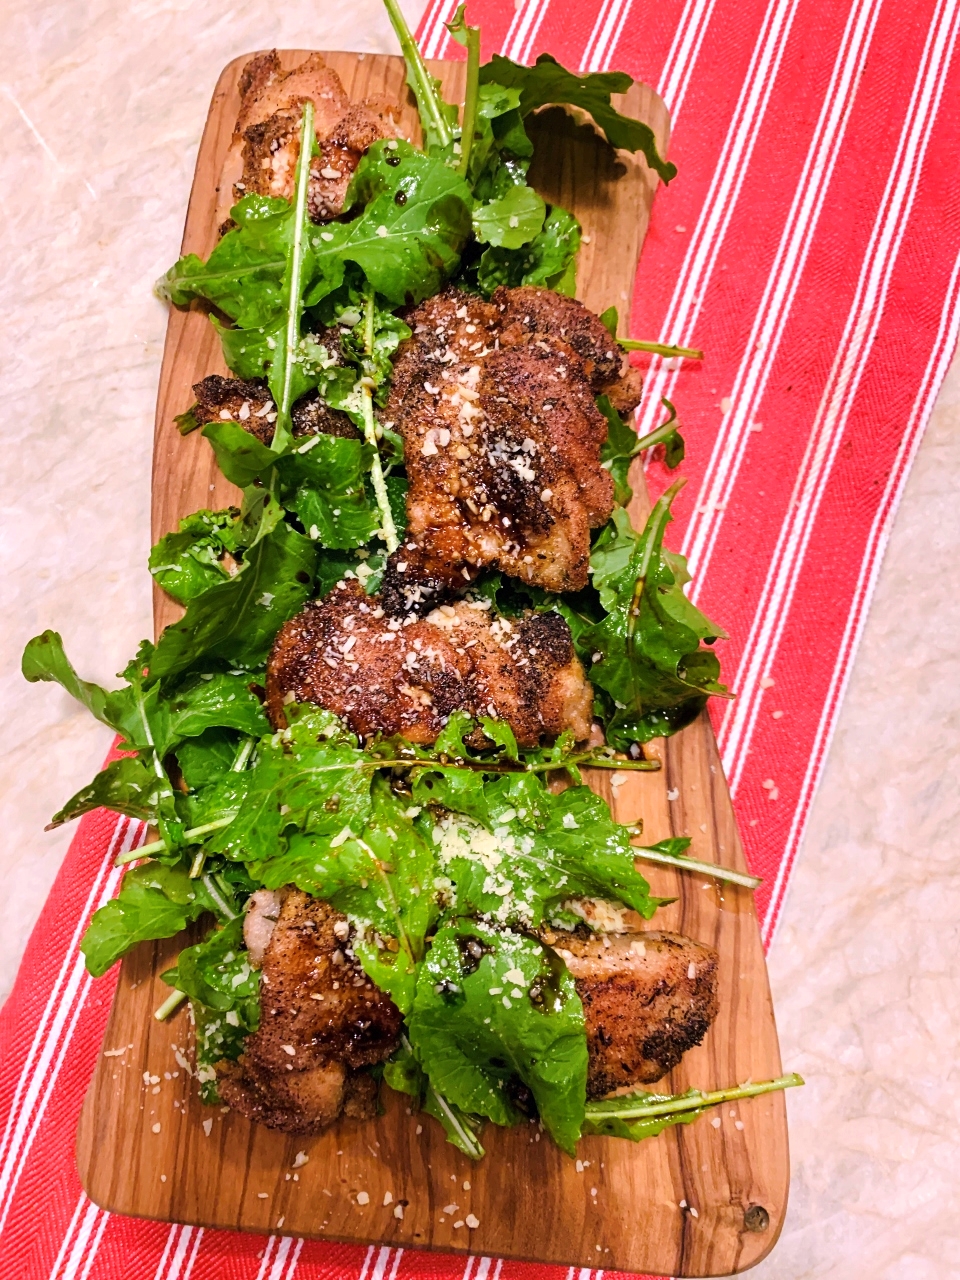 Crispy Chicken with Arugula, Parmesan, and Balsamic – Recipe! Image 1